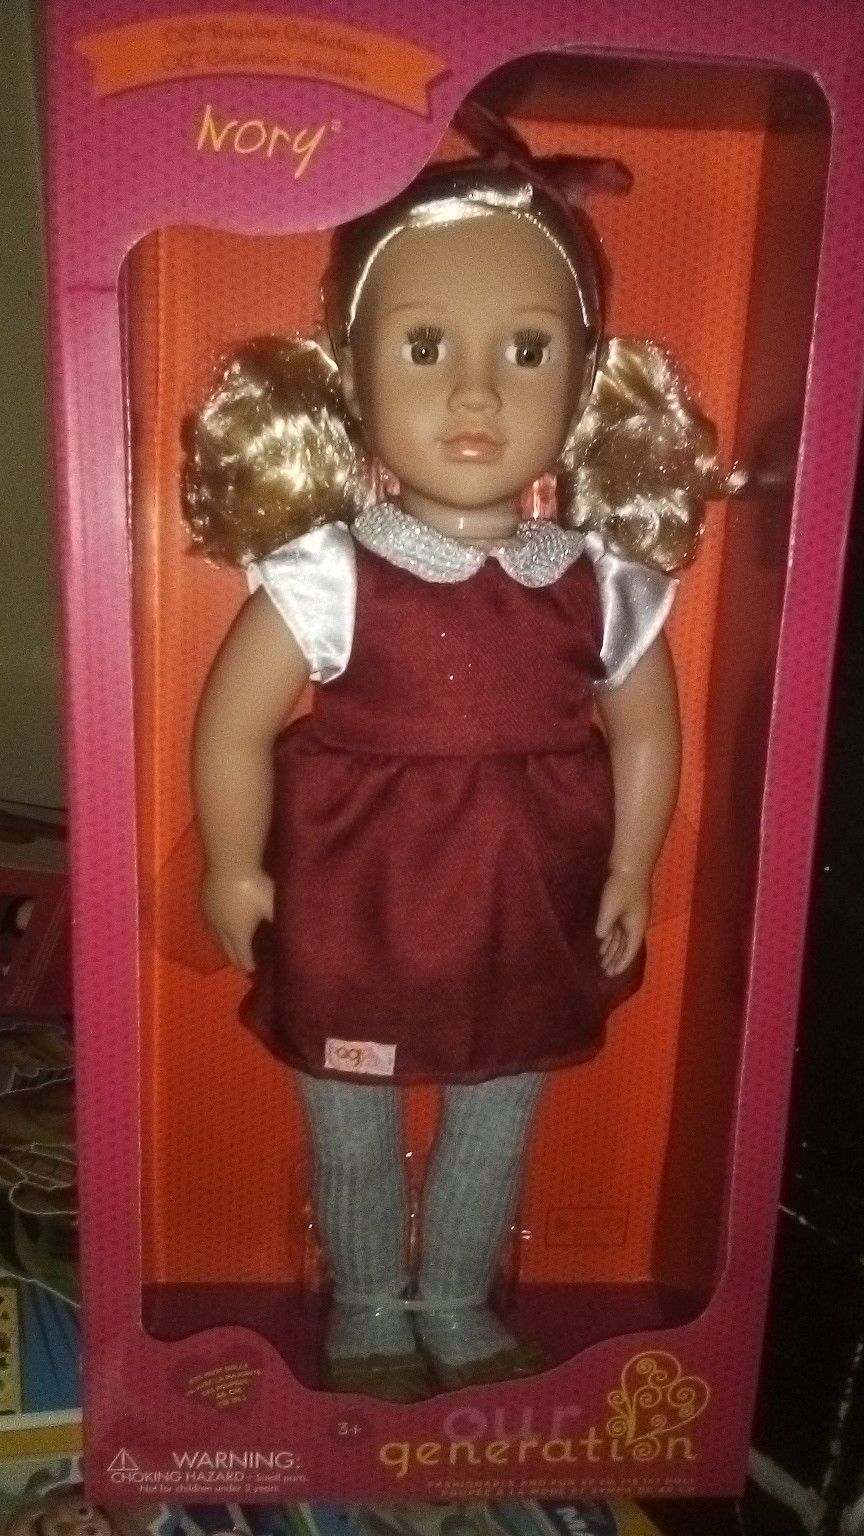 Our generation doll Nora